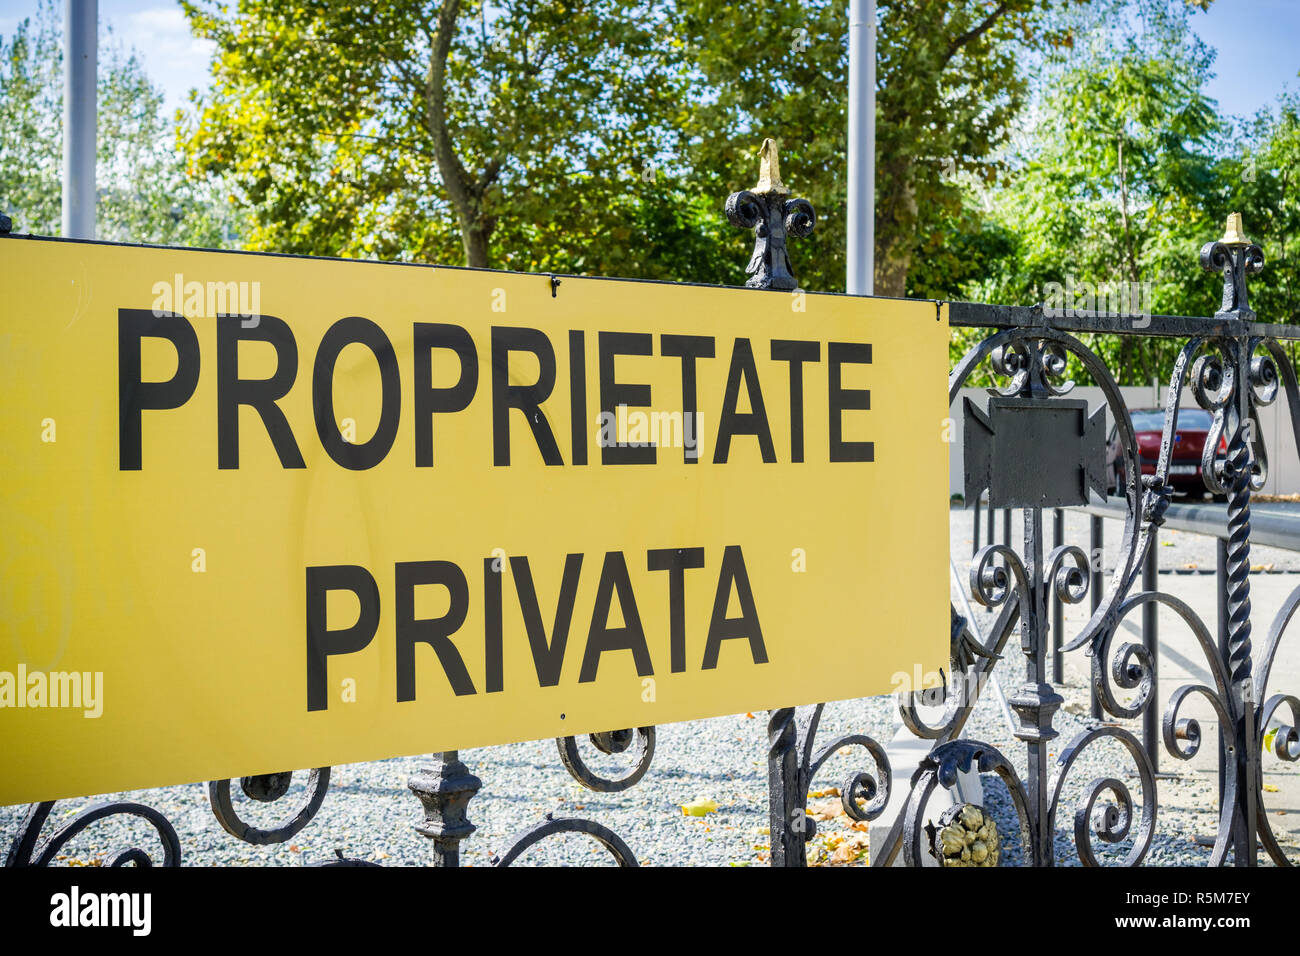 Private Property sign in Bucharest, Romania Stock Photo